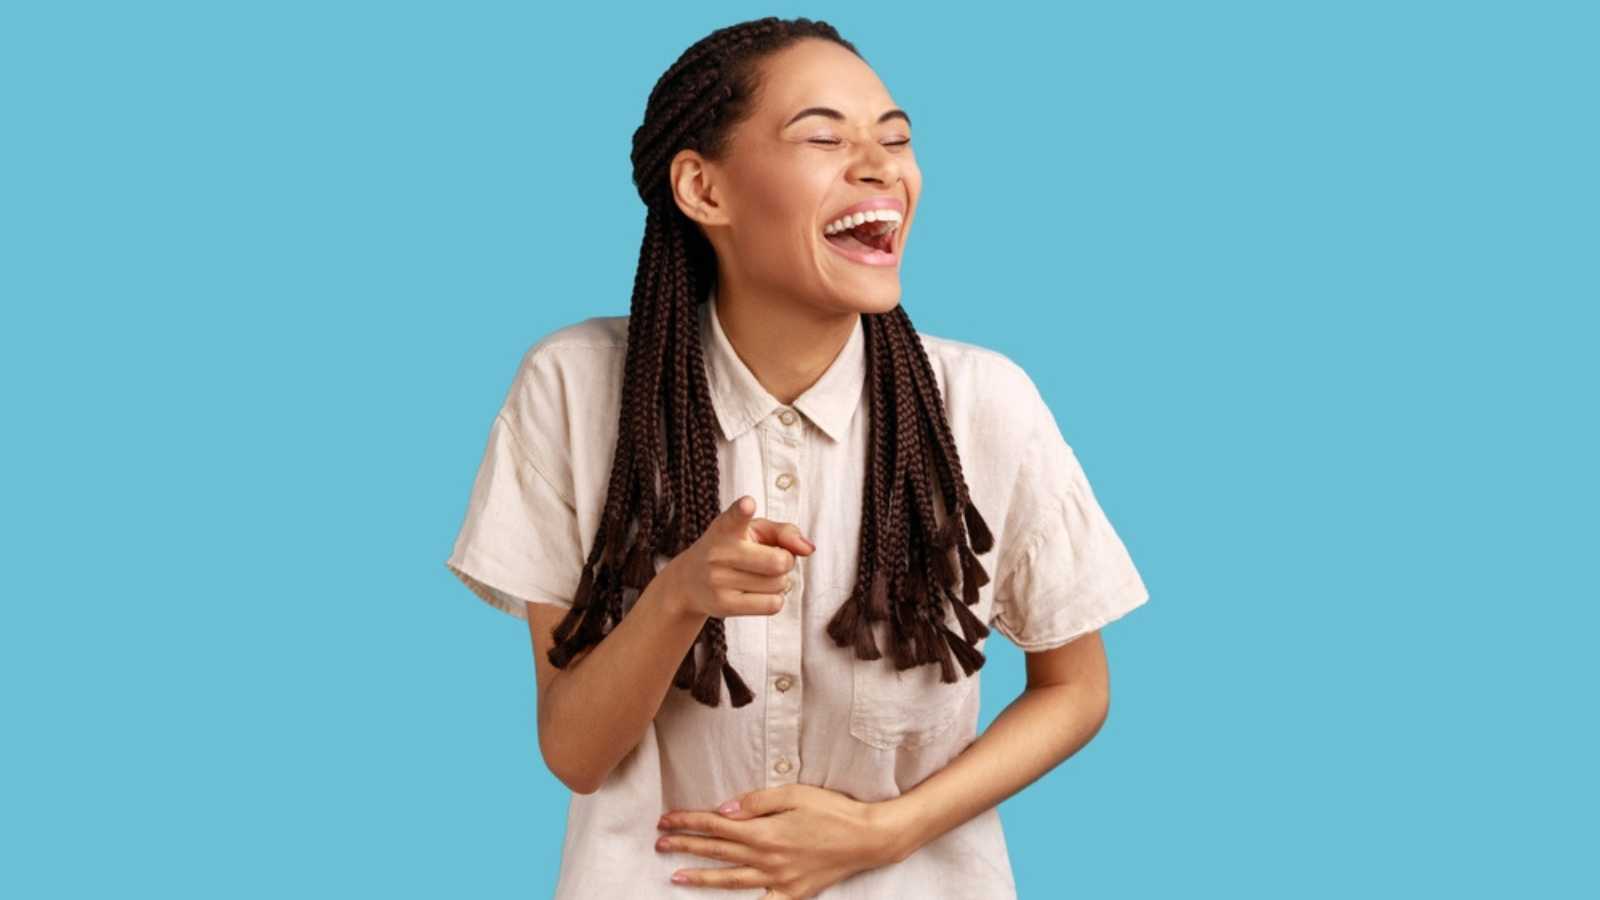 Woman pointing and laughing